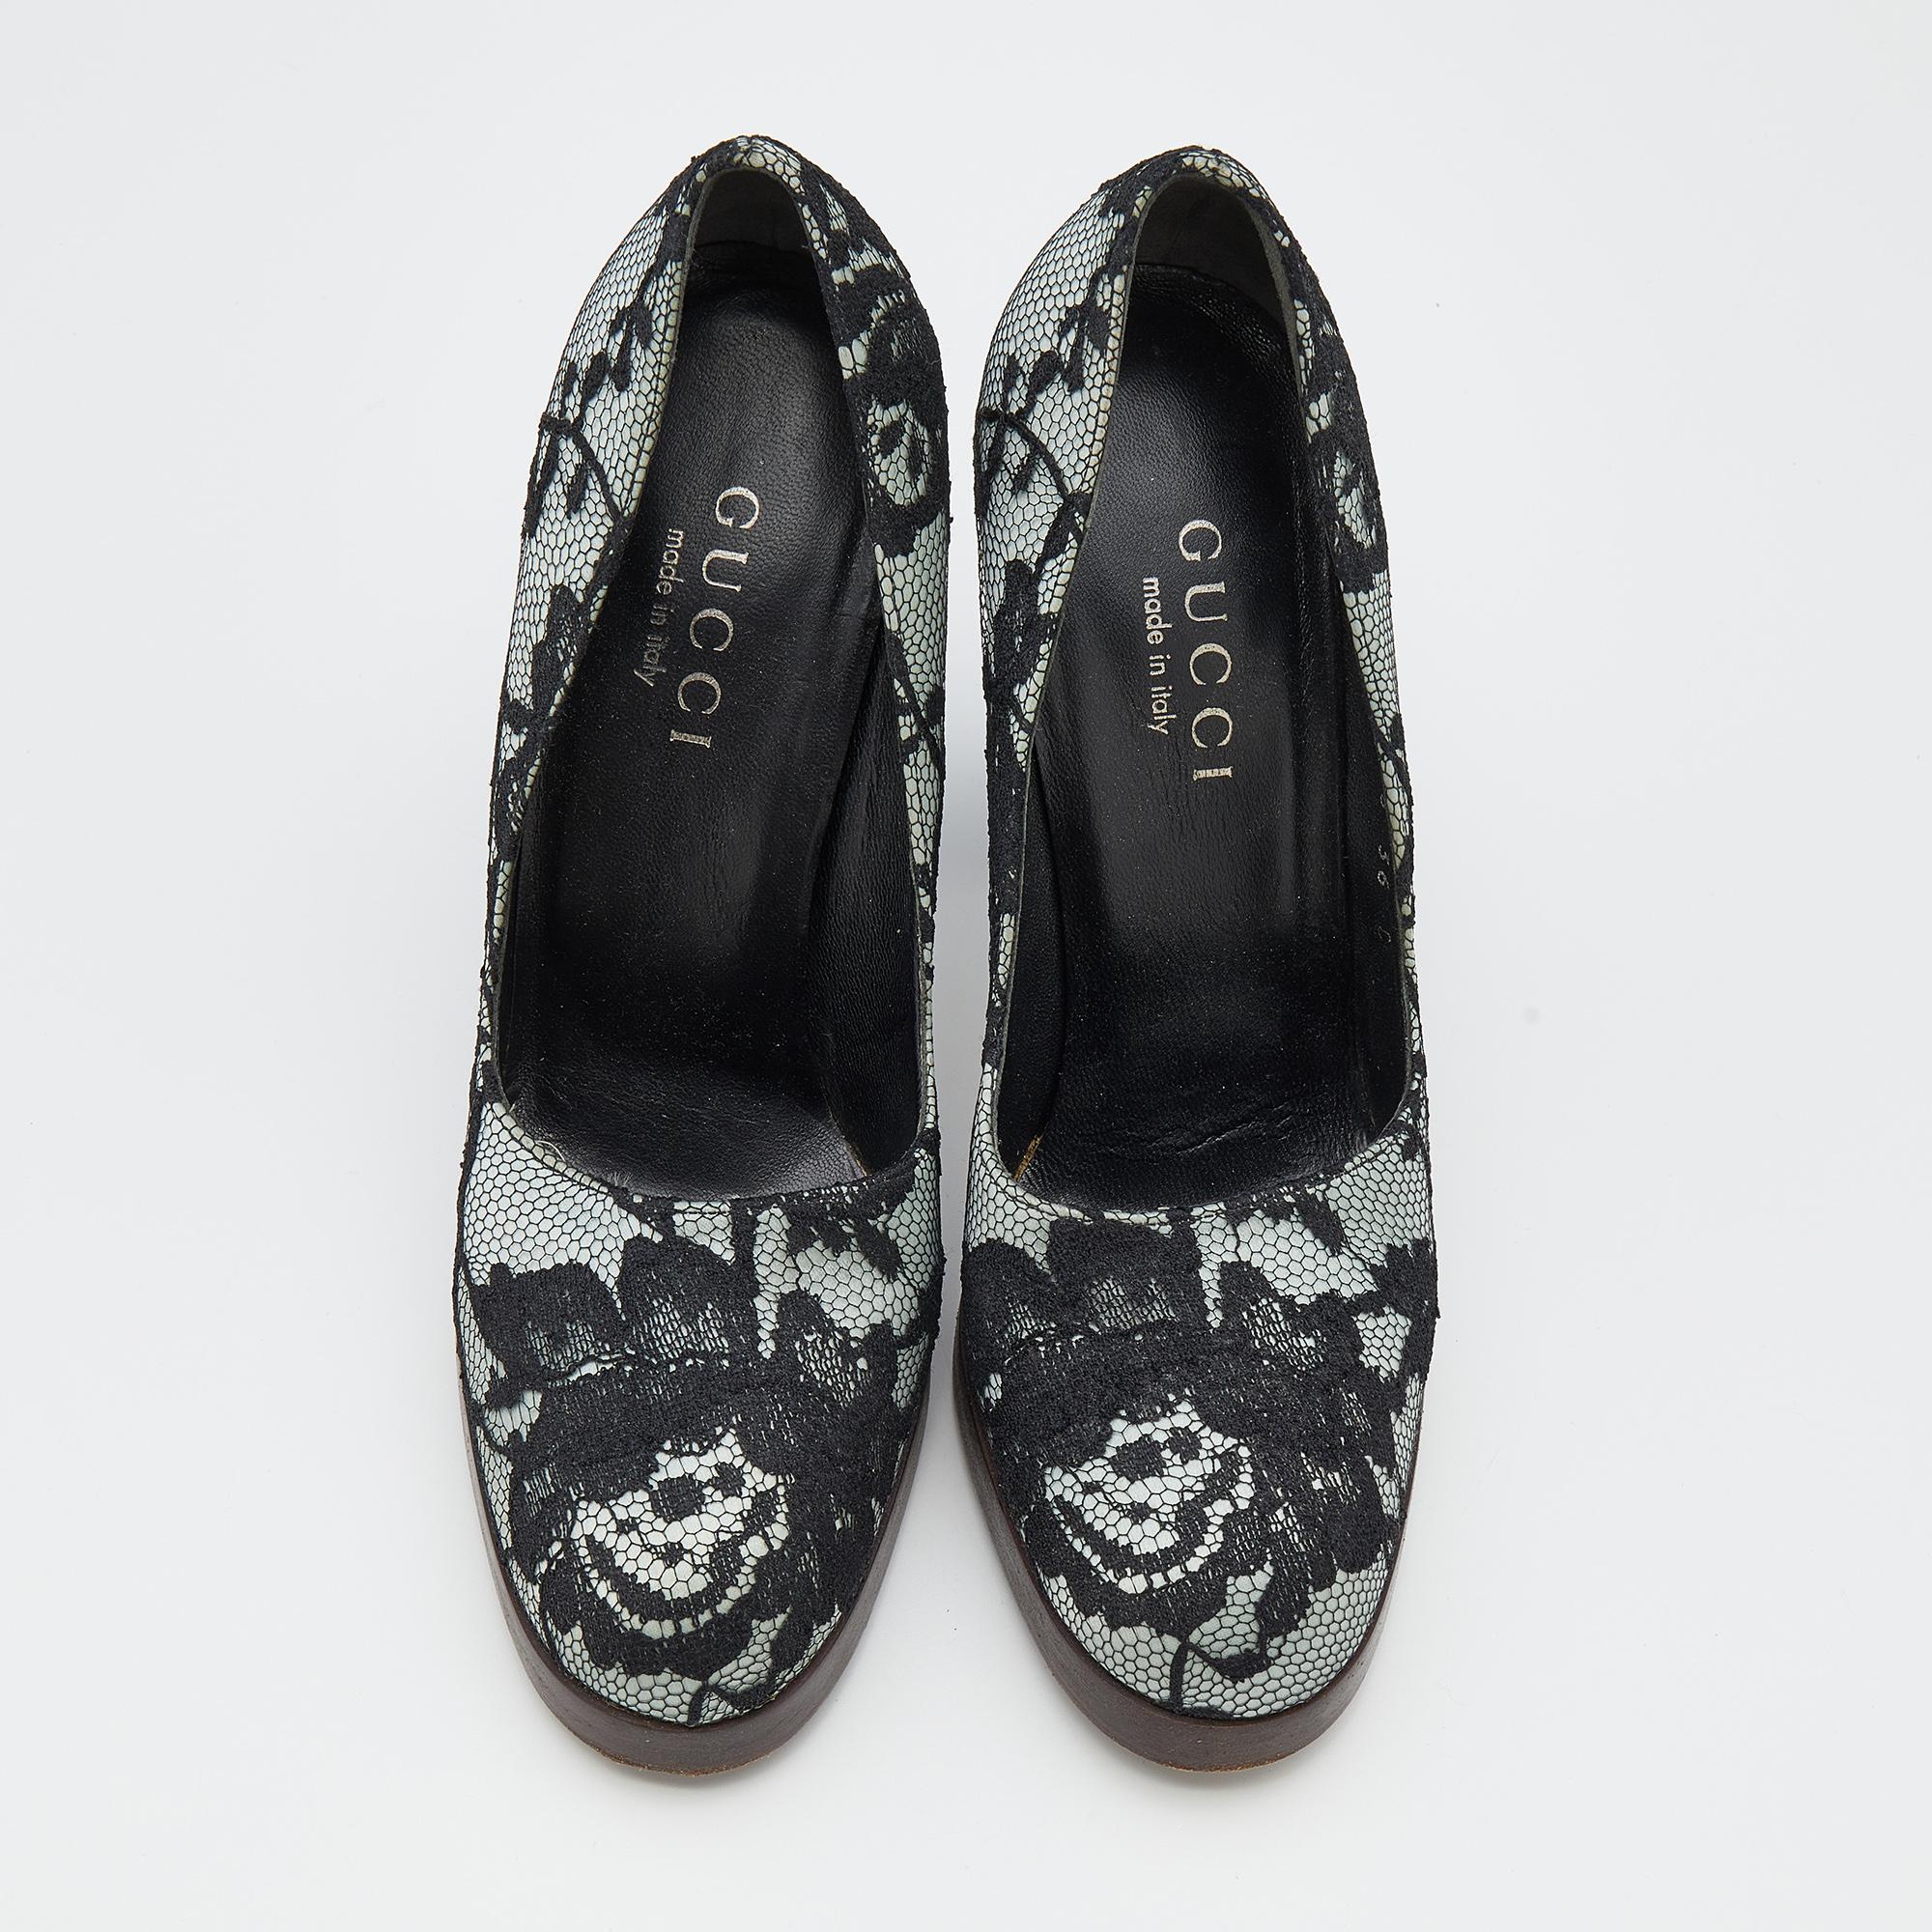 Stay comfortable throughout your day in these lovely pumps from Gucci. The floral lace & satin upper takes the form of covered toes and is mounted on a leather base and block heels.

